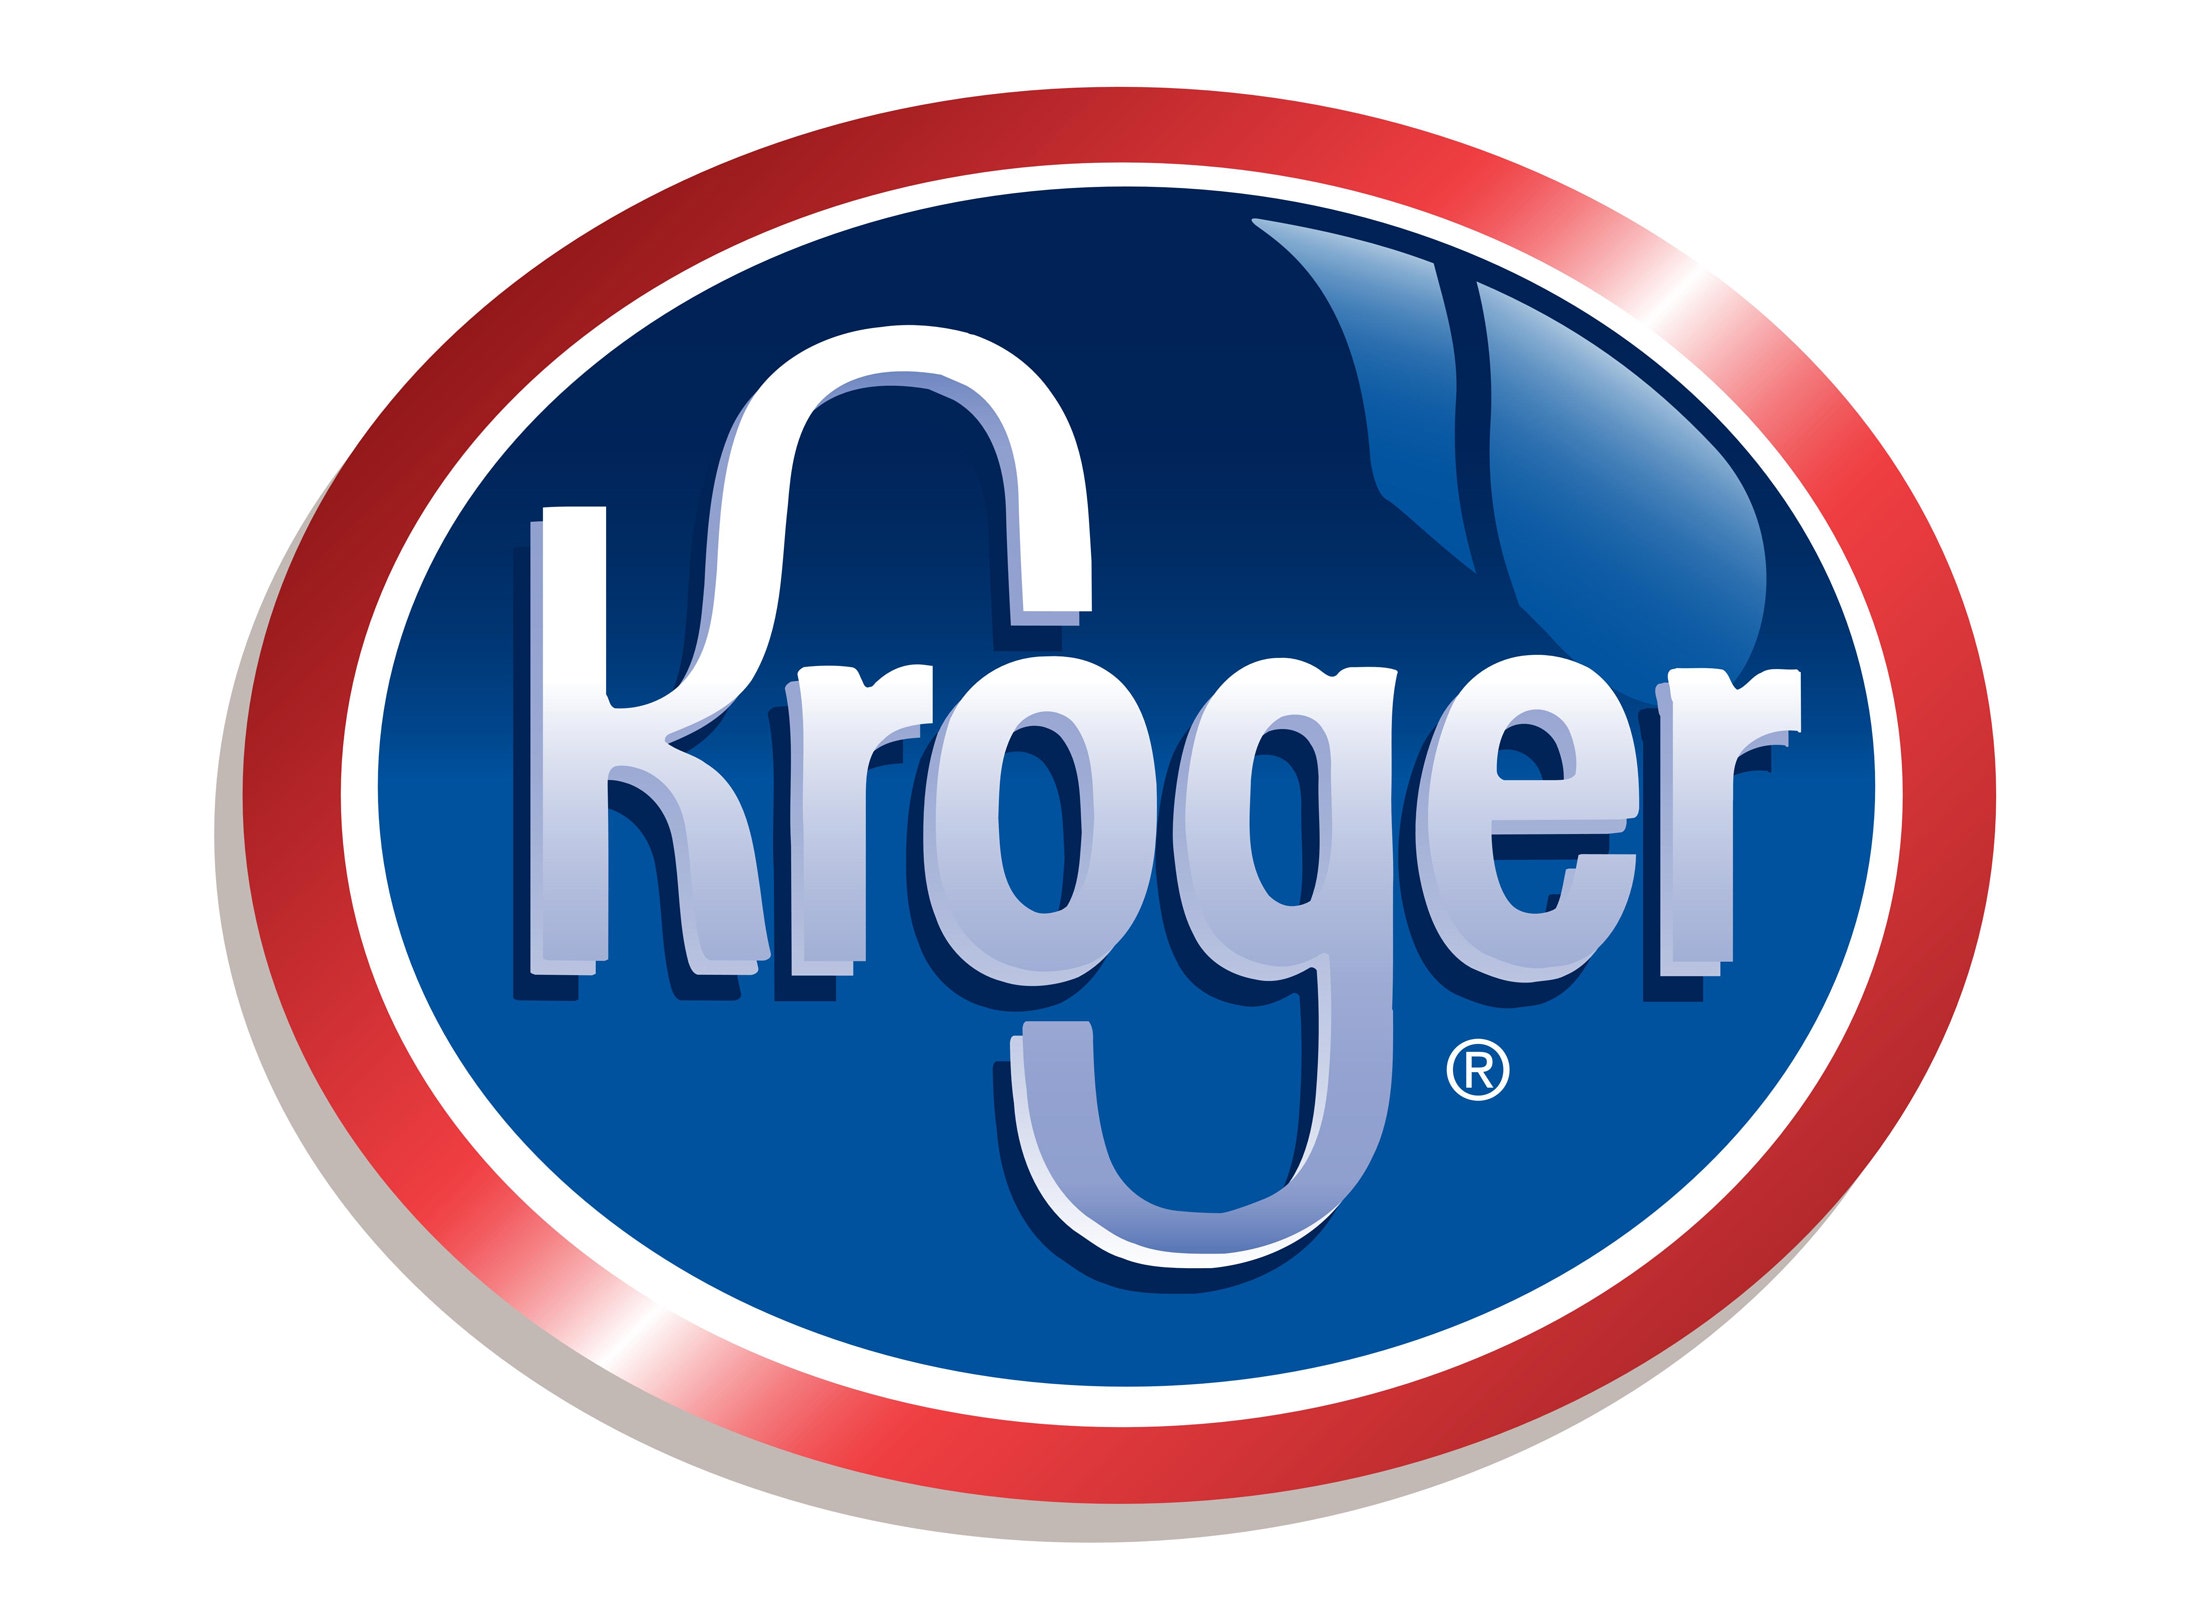 Kroger, ABM Industries And 3 Stocks To Watch Heading Into Friday